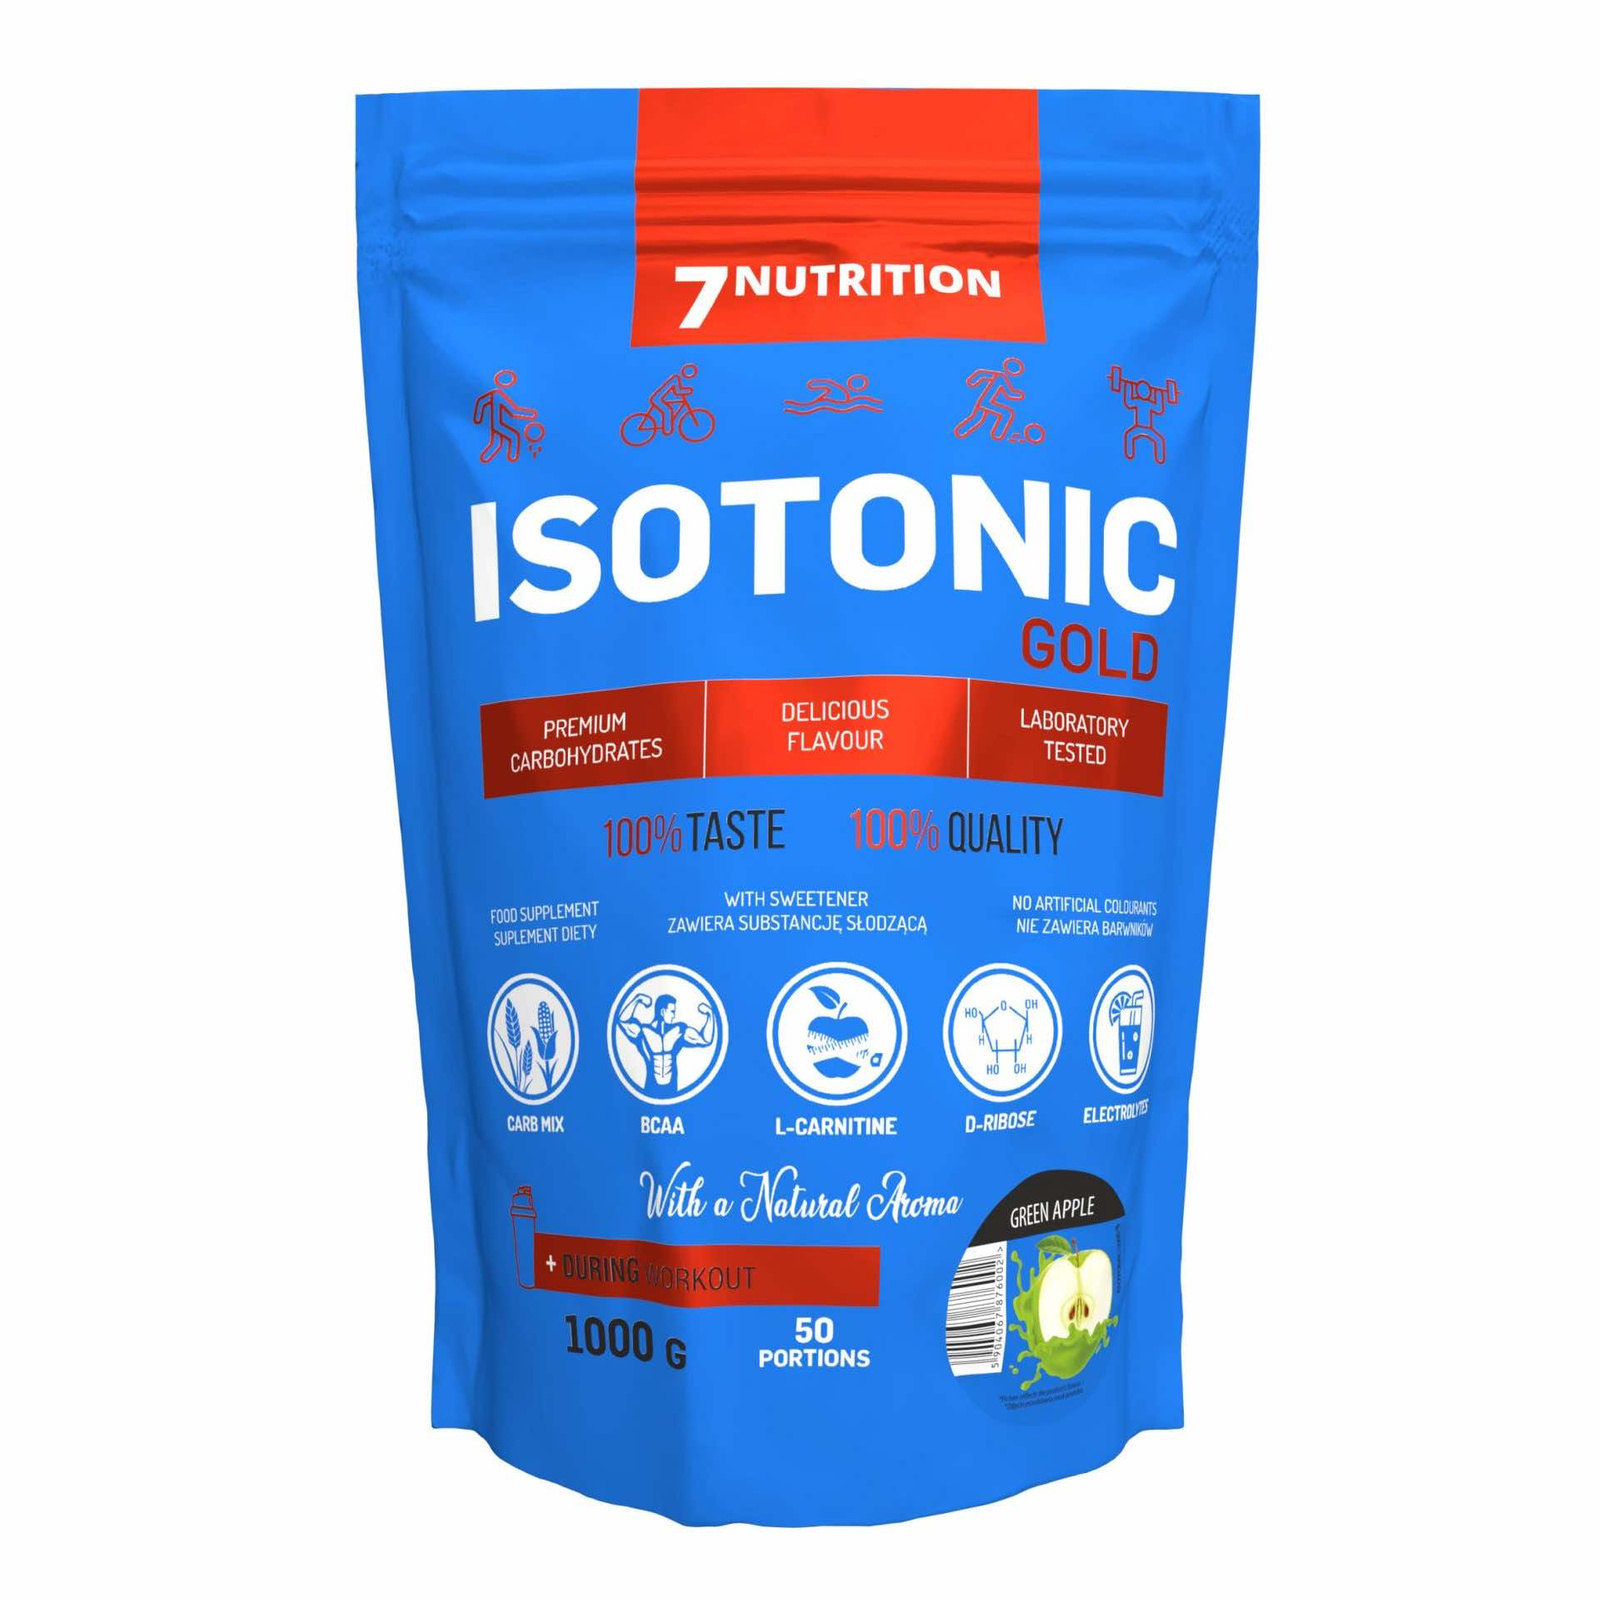 7Nutrition-ISOTONIC-Gold-1000g -green apple